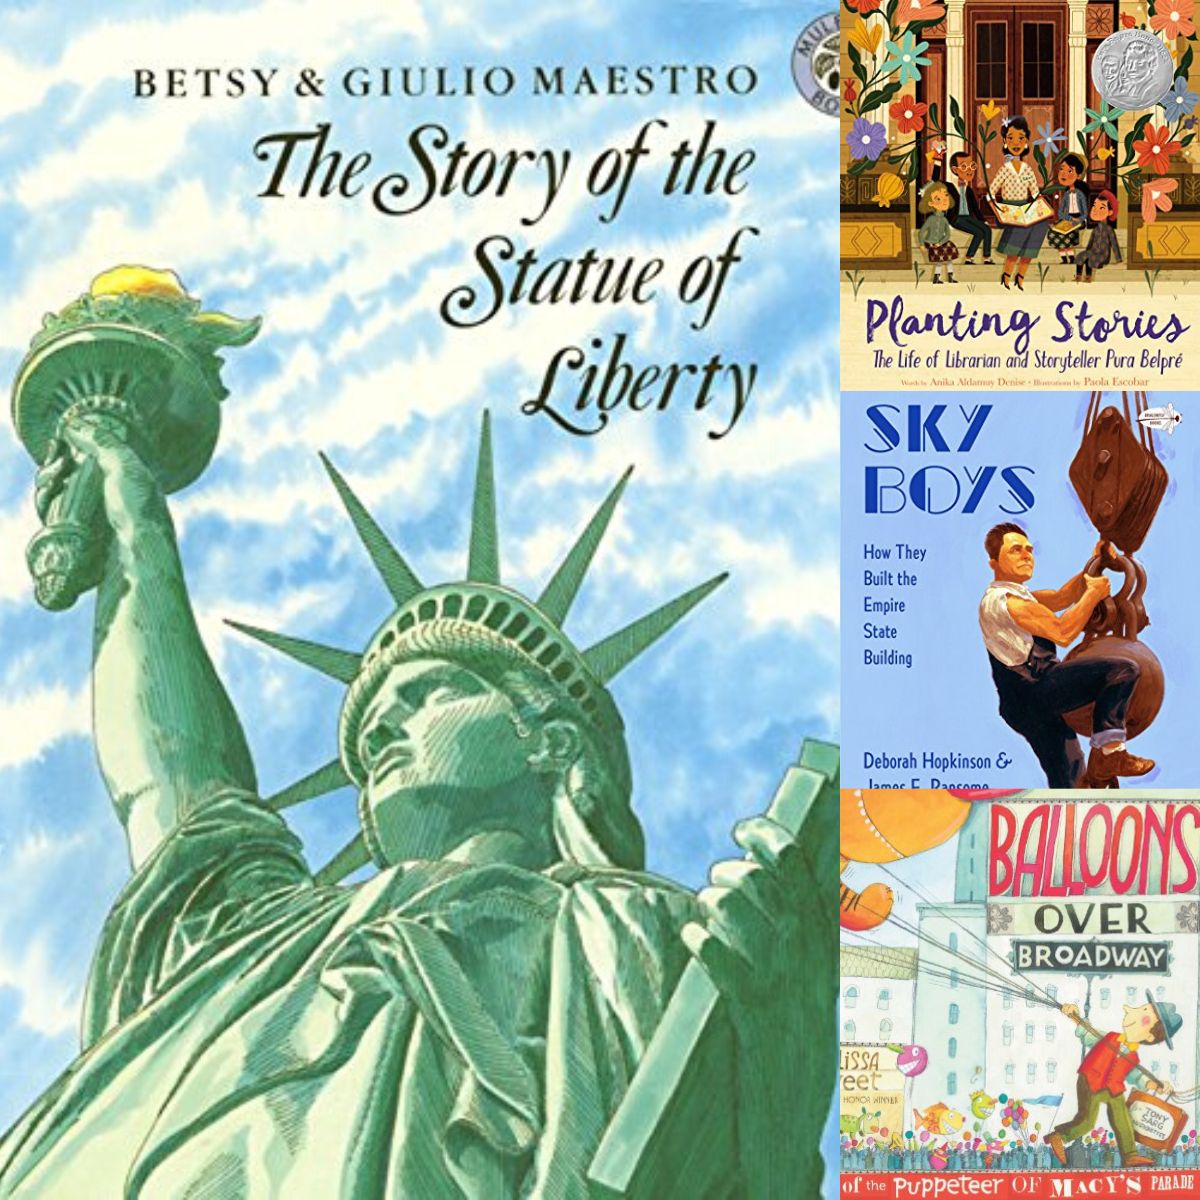 A photo collage shows several picture book covers with the Statue of Liberty, Broadway, and Skyscrapers on the covers.